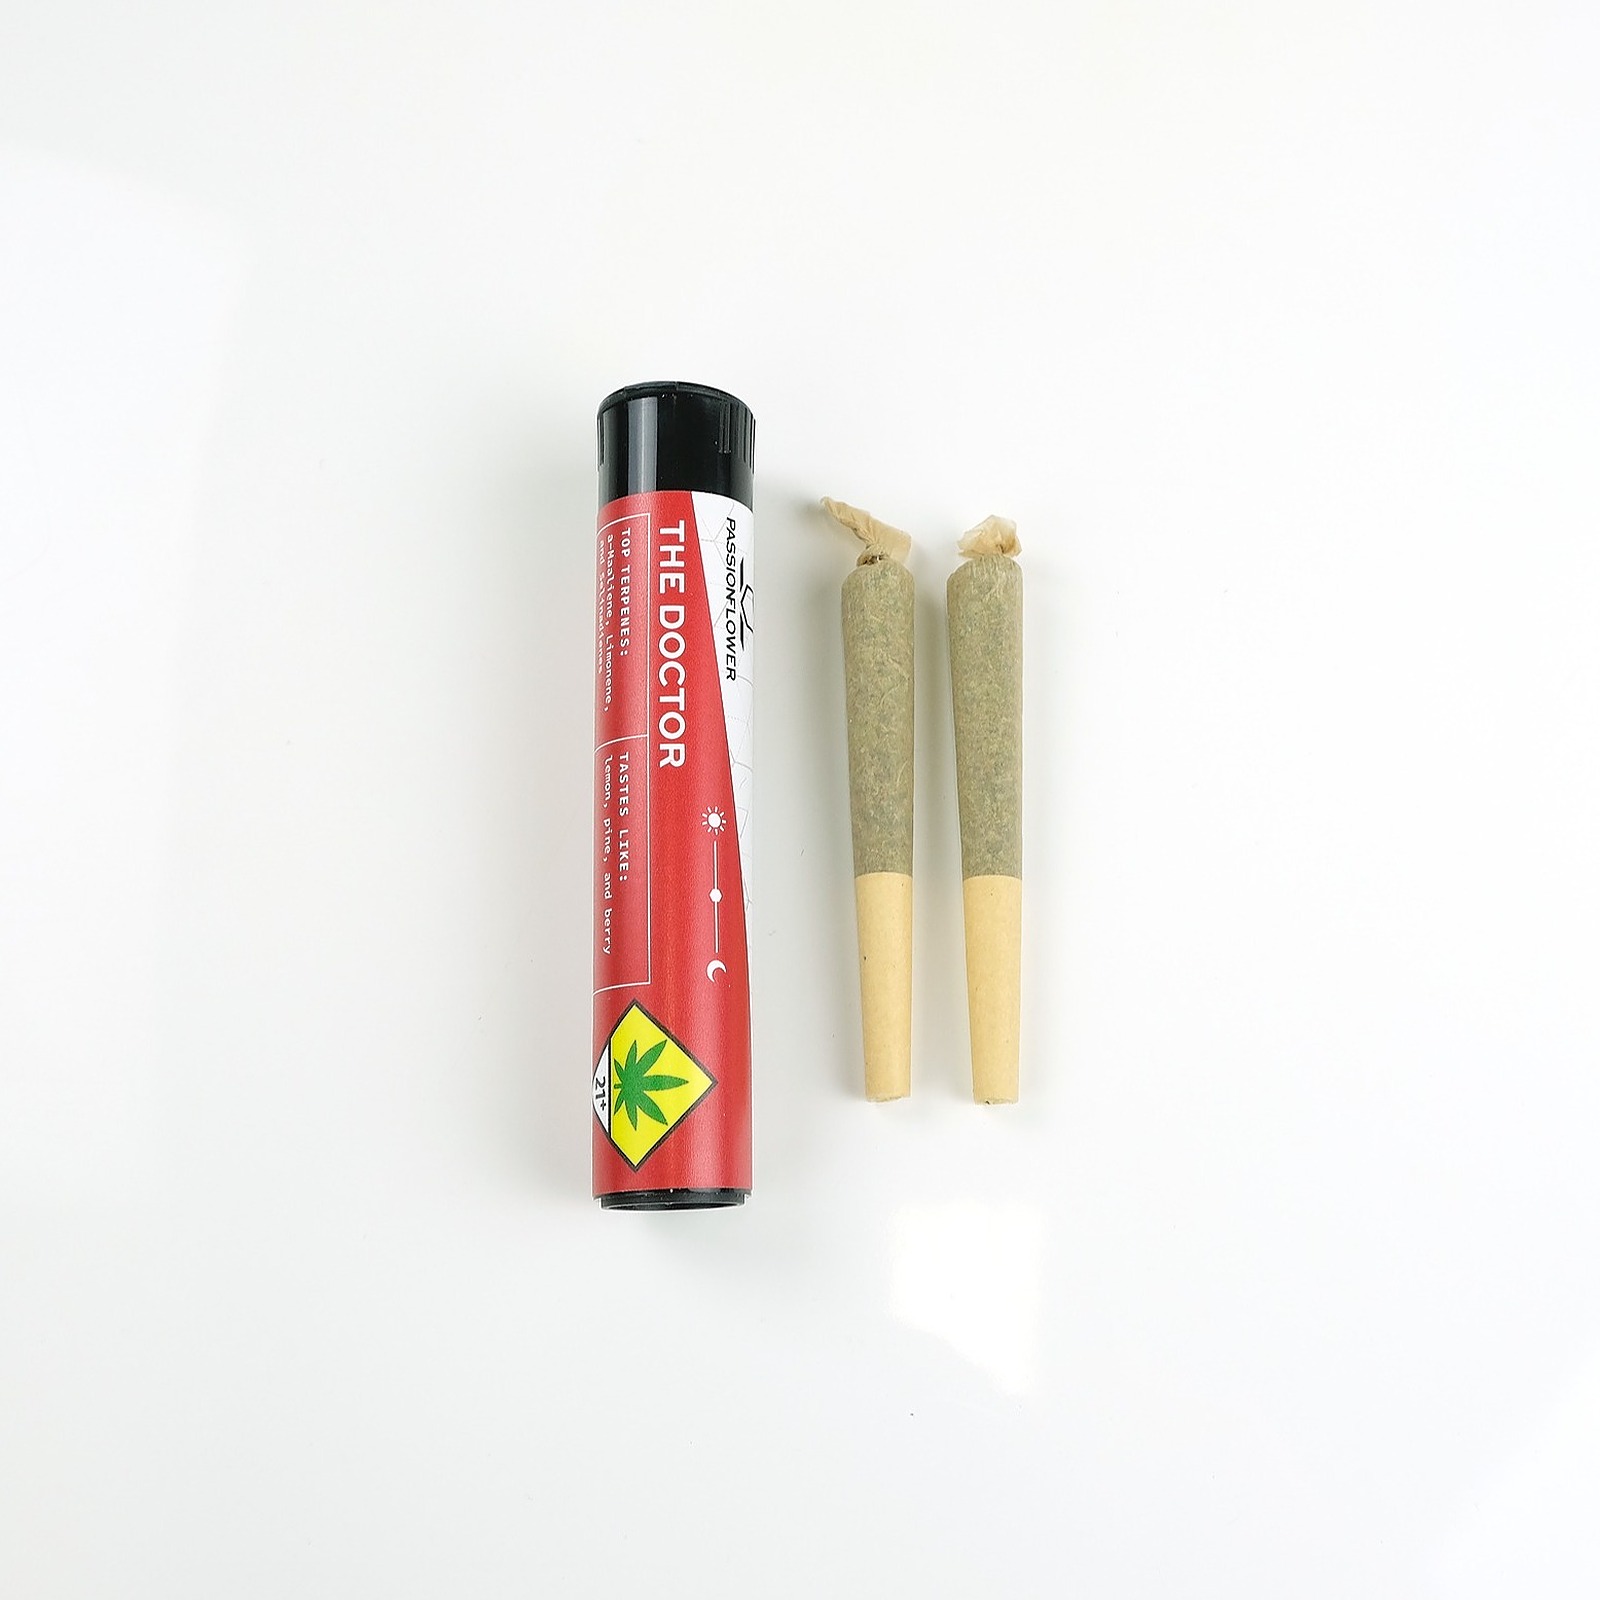 Passion Pre-Roll Pineapple Meatball